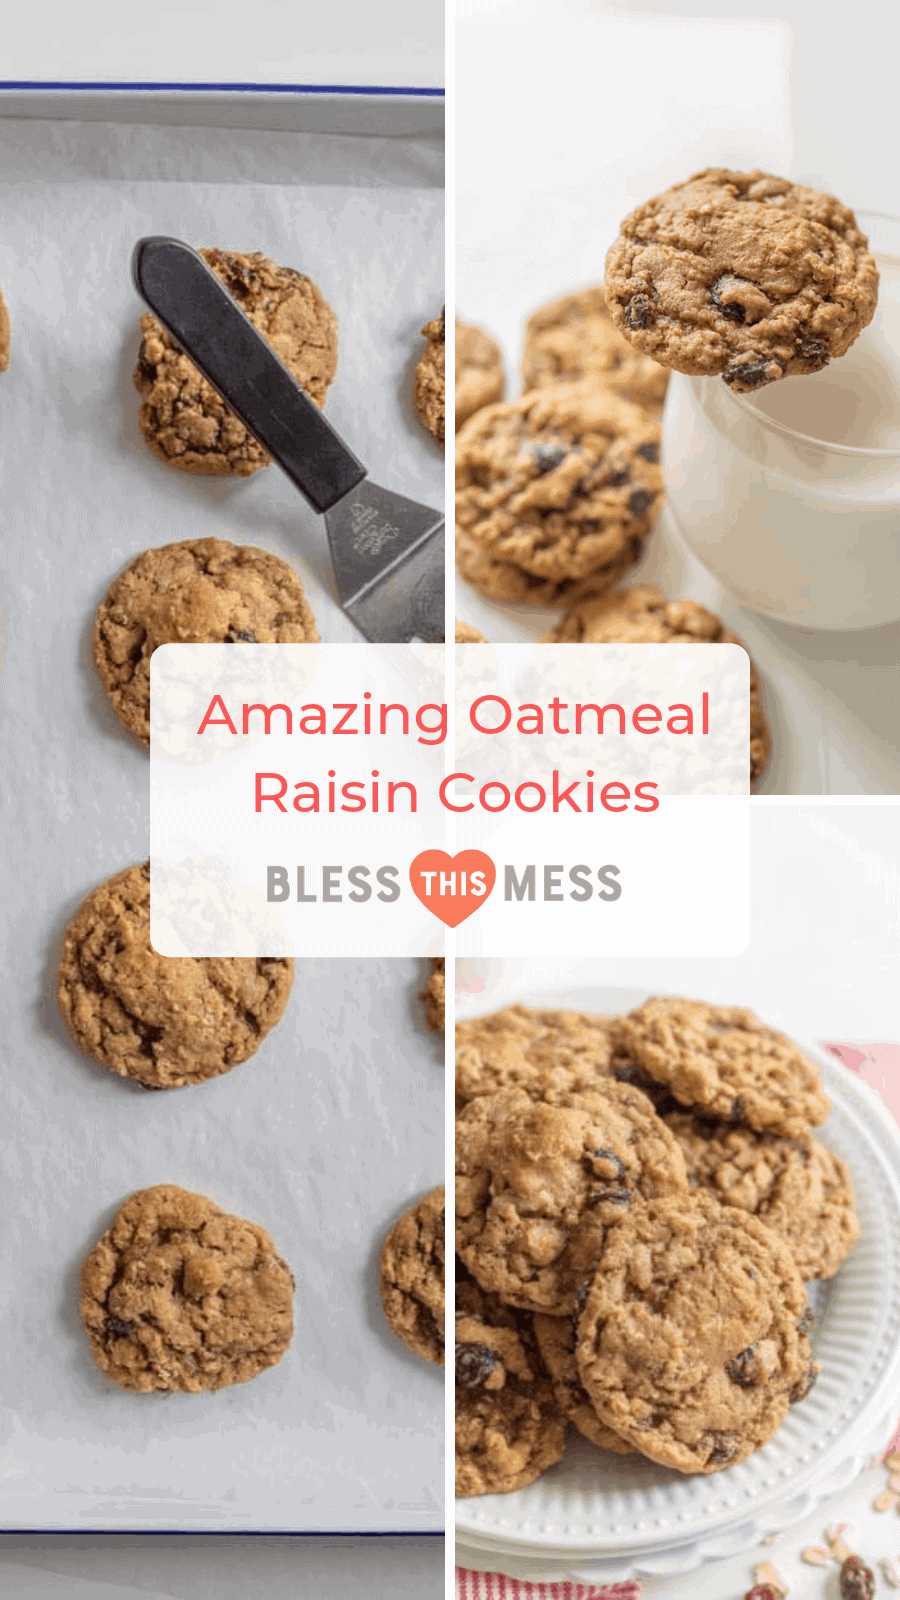 These classic and Amazing Oatmeal Raisin Cookies feature ultra-plump raisins, two types of oats, chopped pecans, and the perfect blend of sweetness and warm spices. 